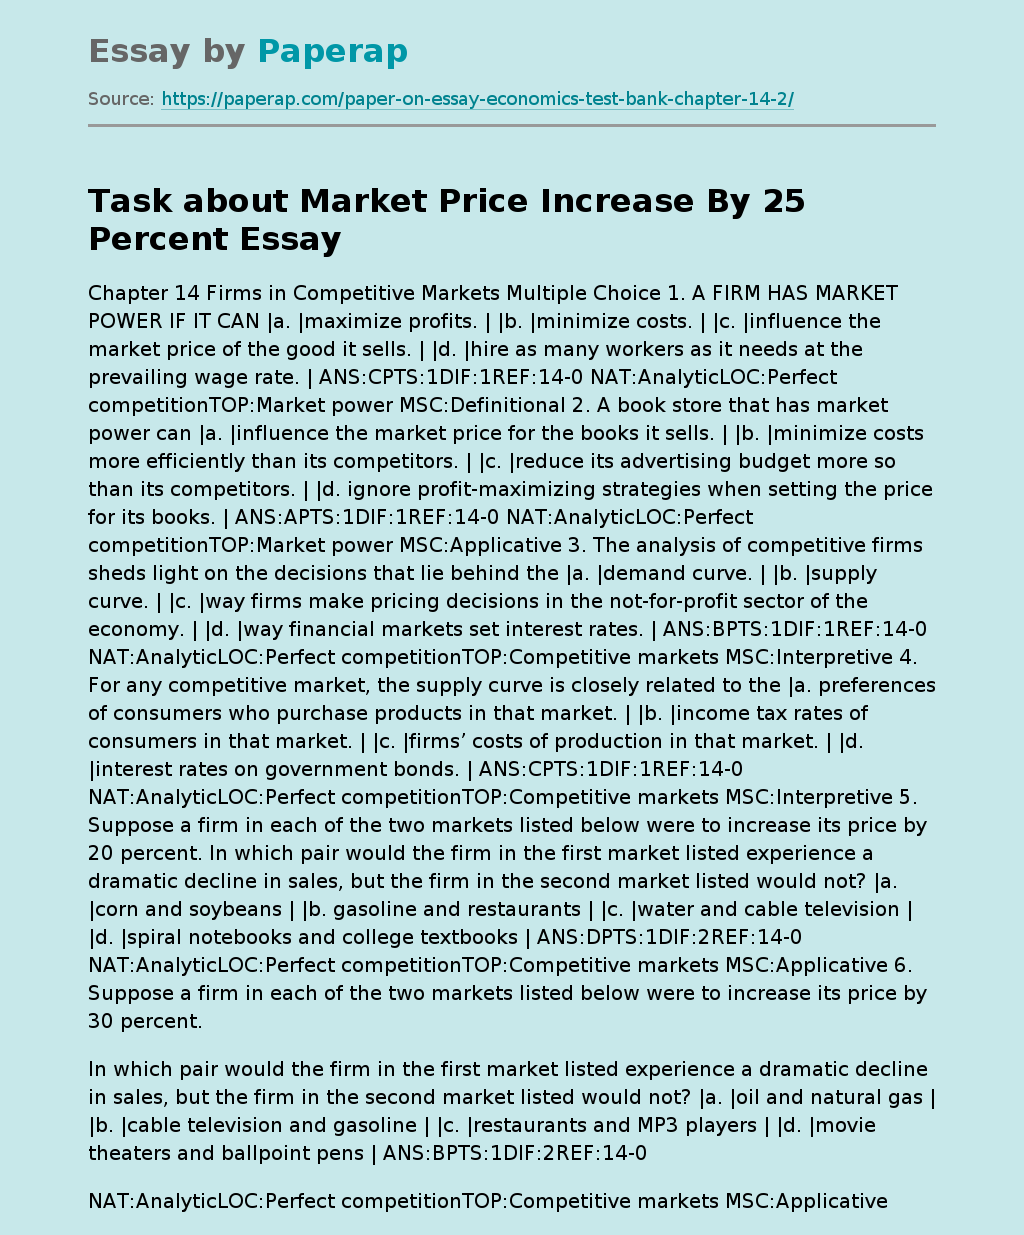 Task about Market Price Increase By 25 Percent